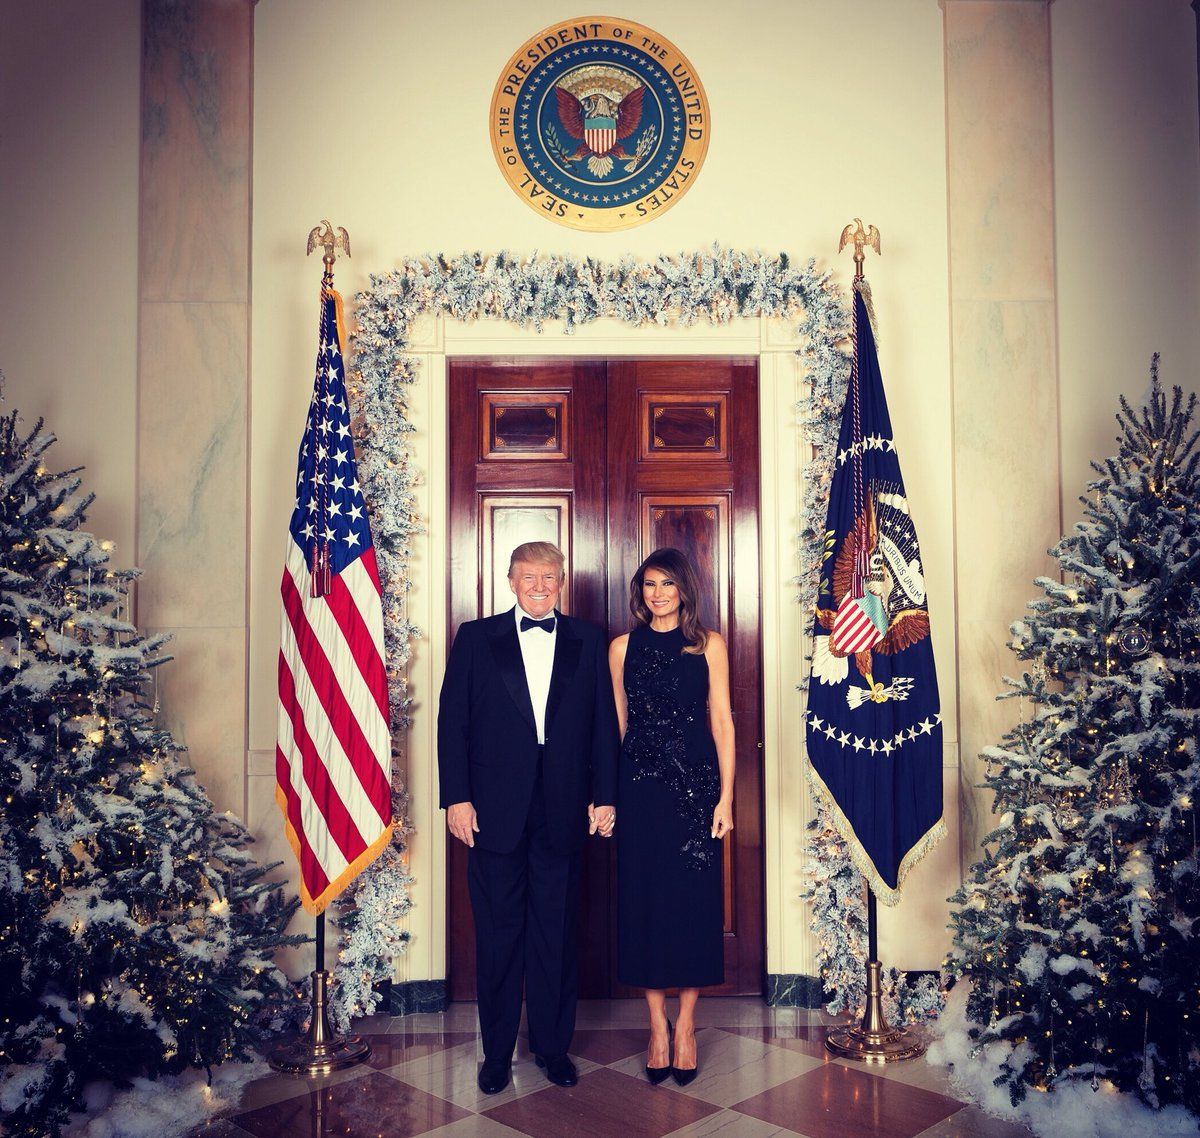 President, first lady’s official White House Christmas portrait